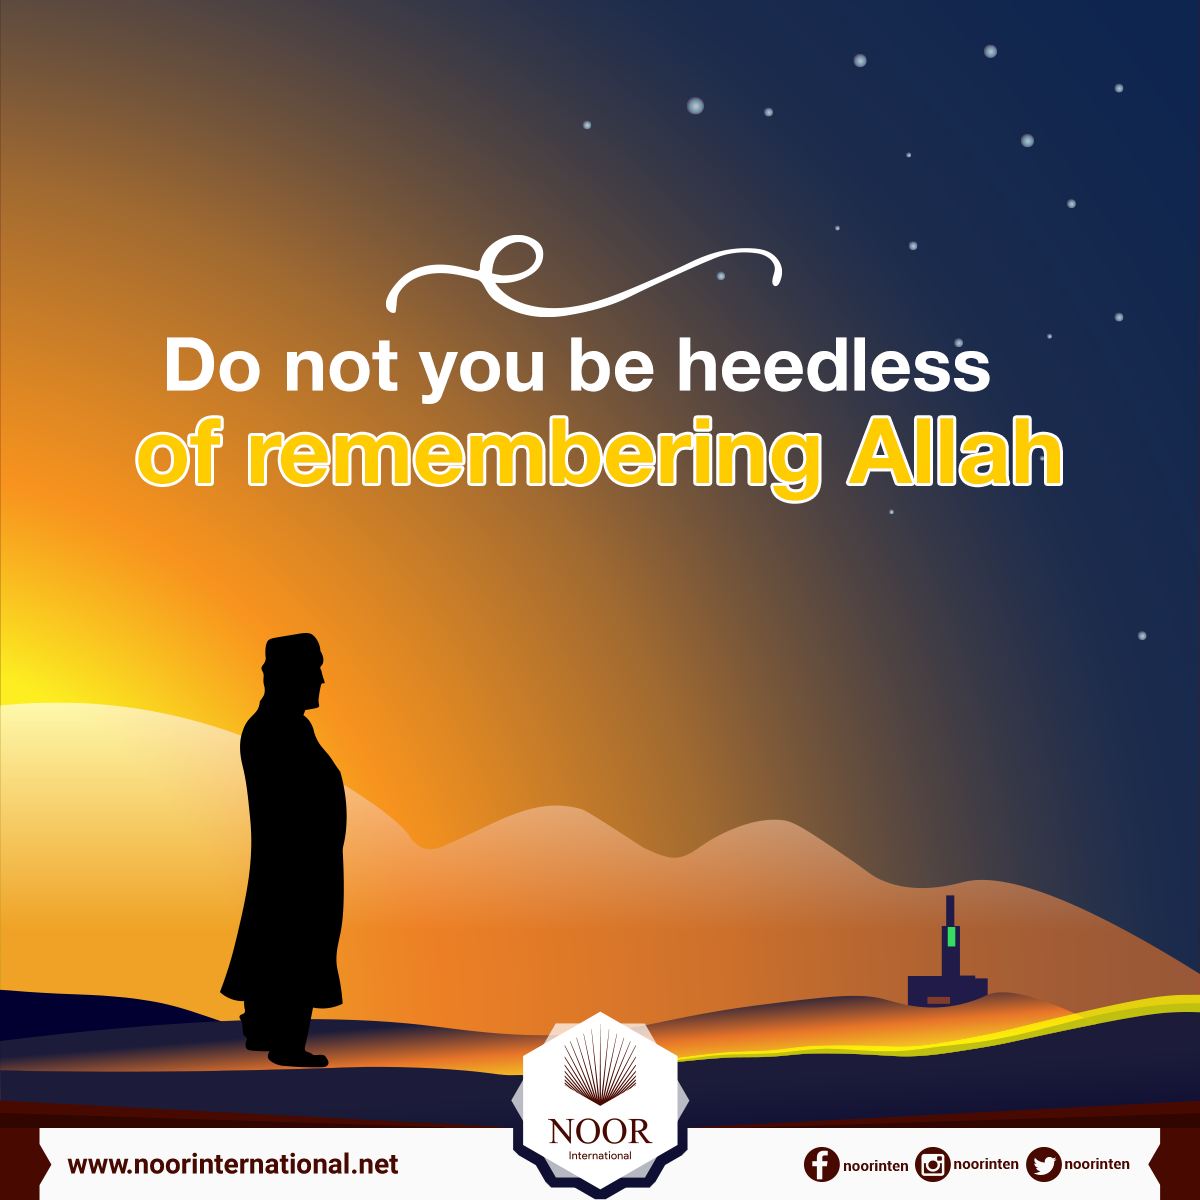 Do not you be heedless of remembering Allah